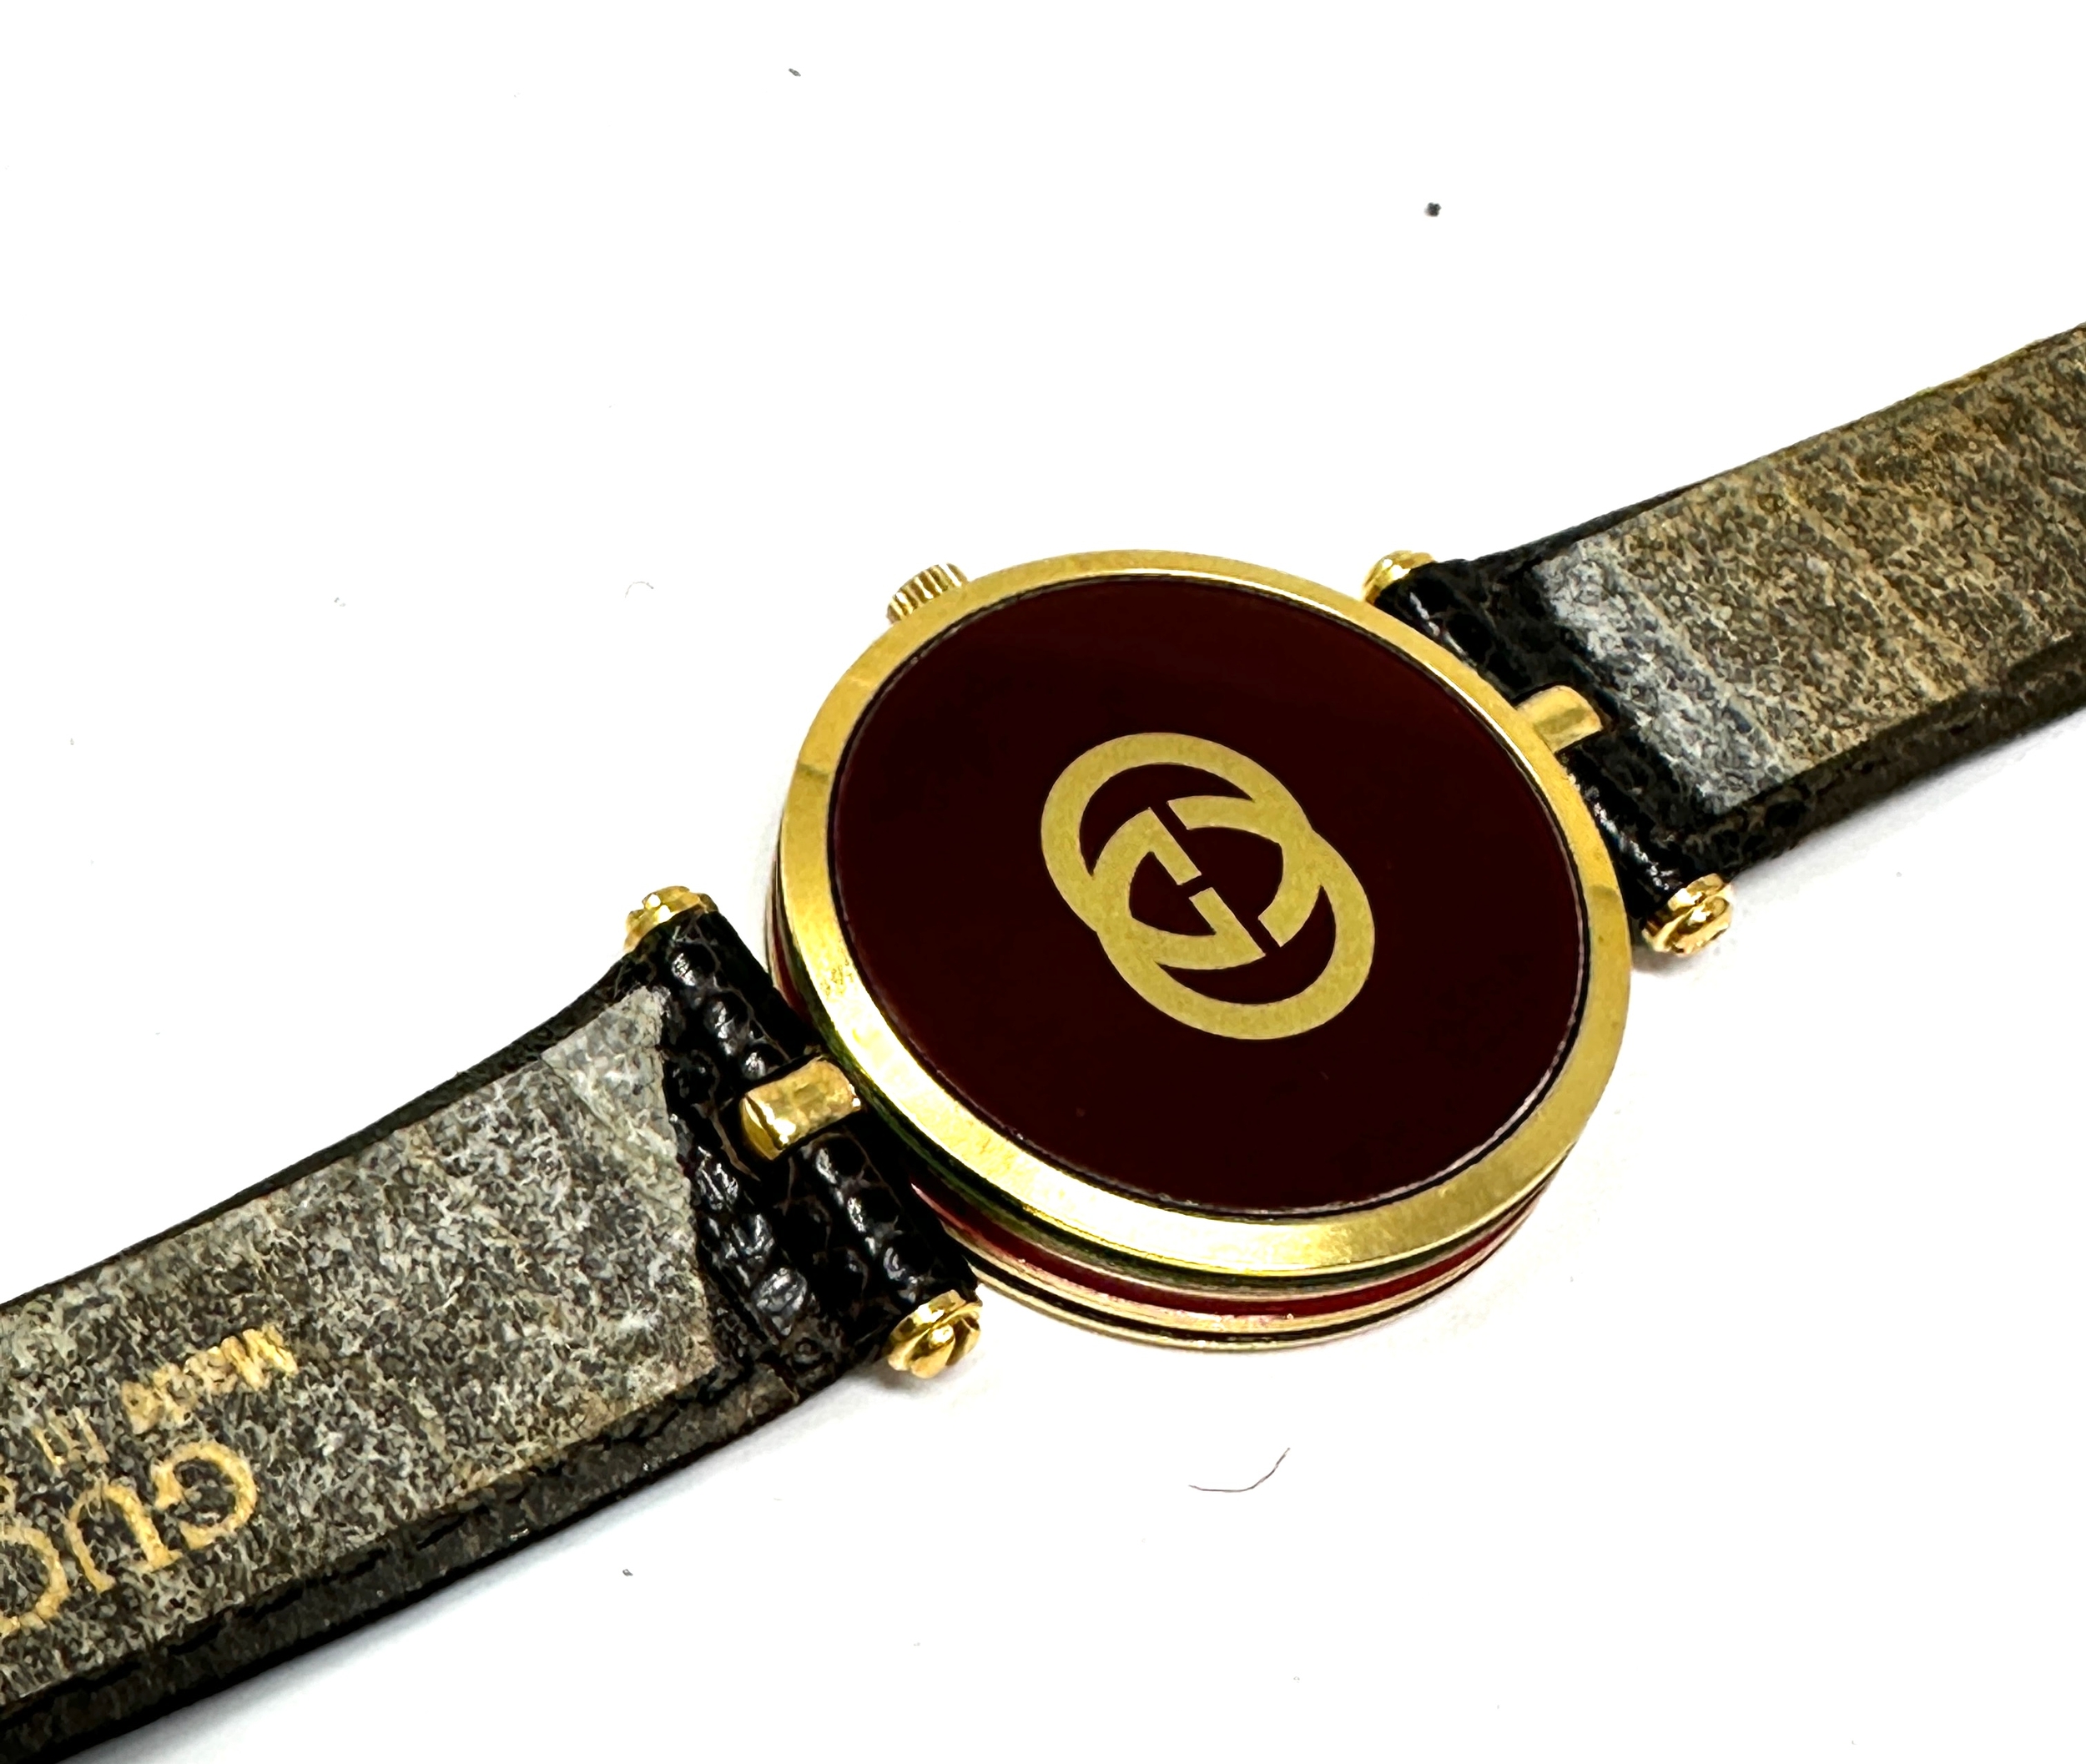 Vintage Gucci Quartz Swiss Made WristWatch With Gucci Black Leather Band the watch is not ticking - Image 2 of 4